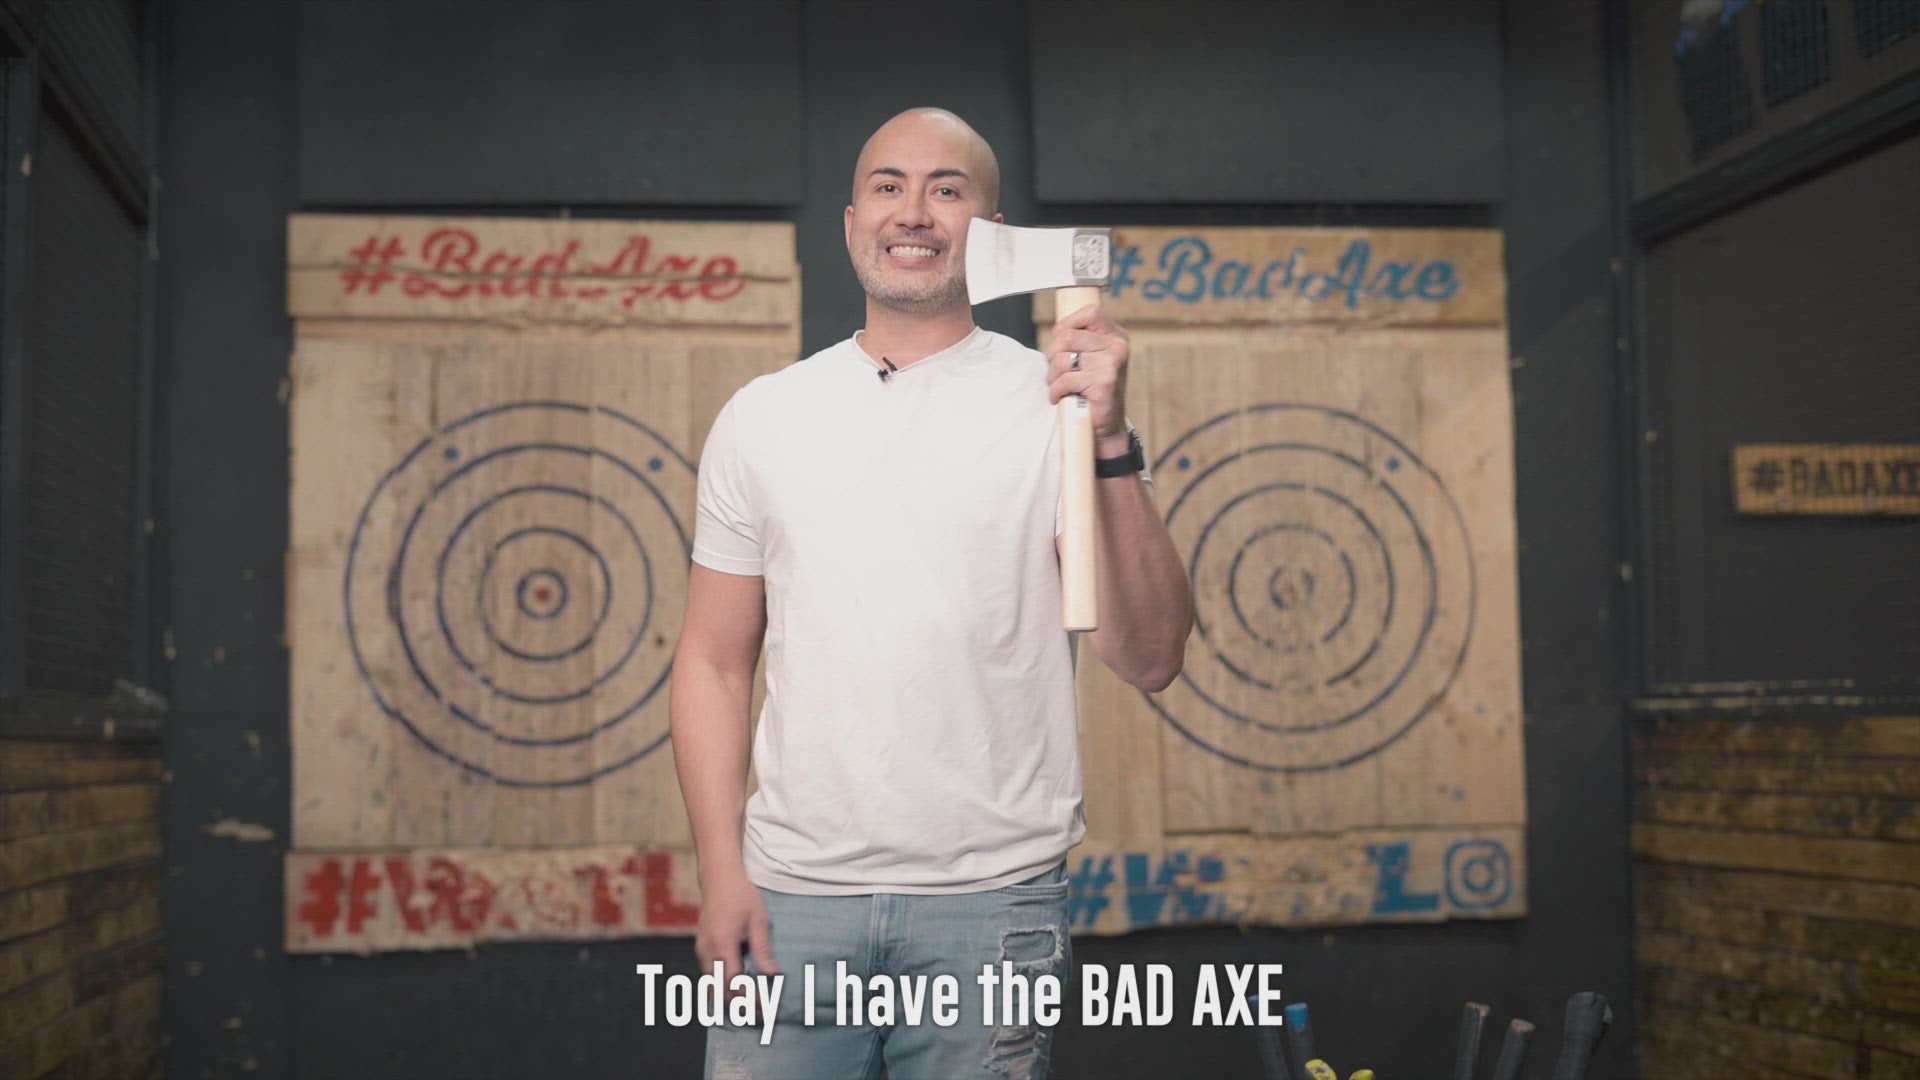 Introduction of the new bad axe throwing axe by world axe throwing league (WATL)